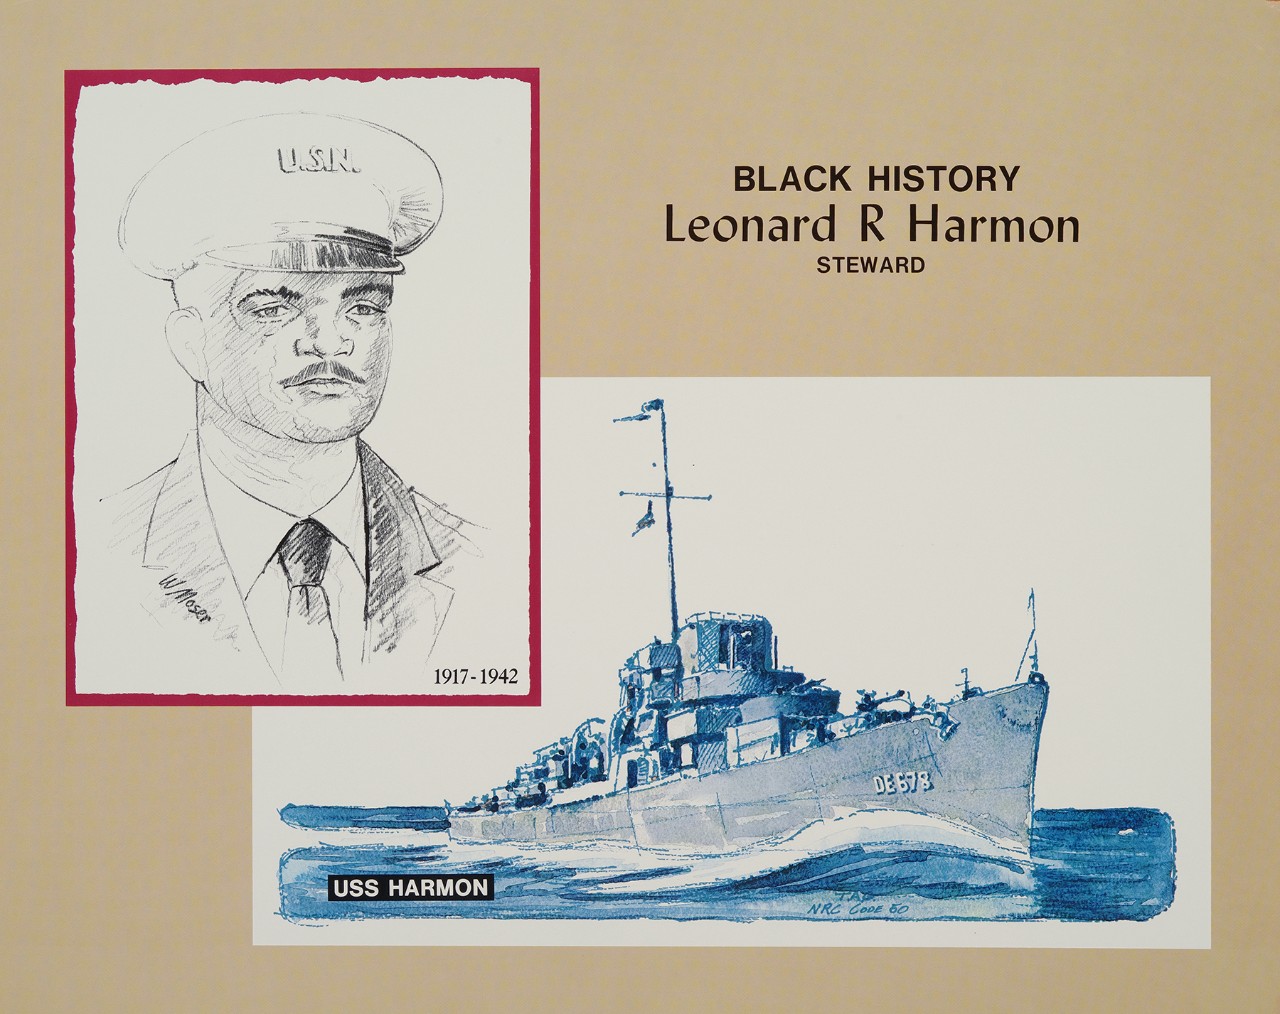 Two images the left is a portrait of ship USS Harmon, the right is a portrait of Leonard Harmon